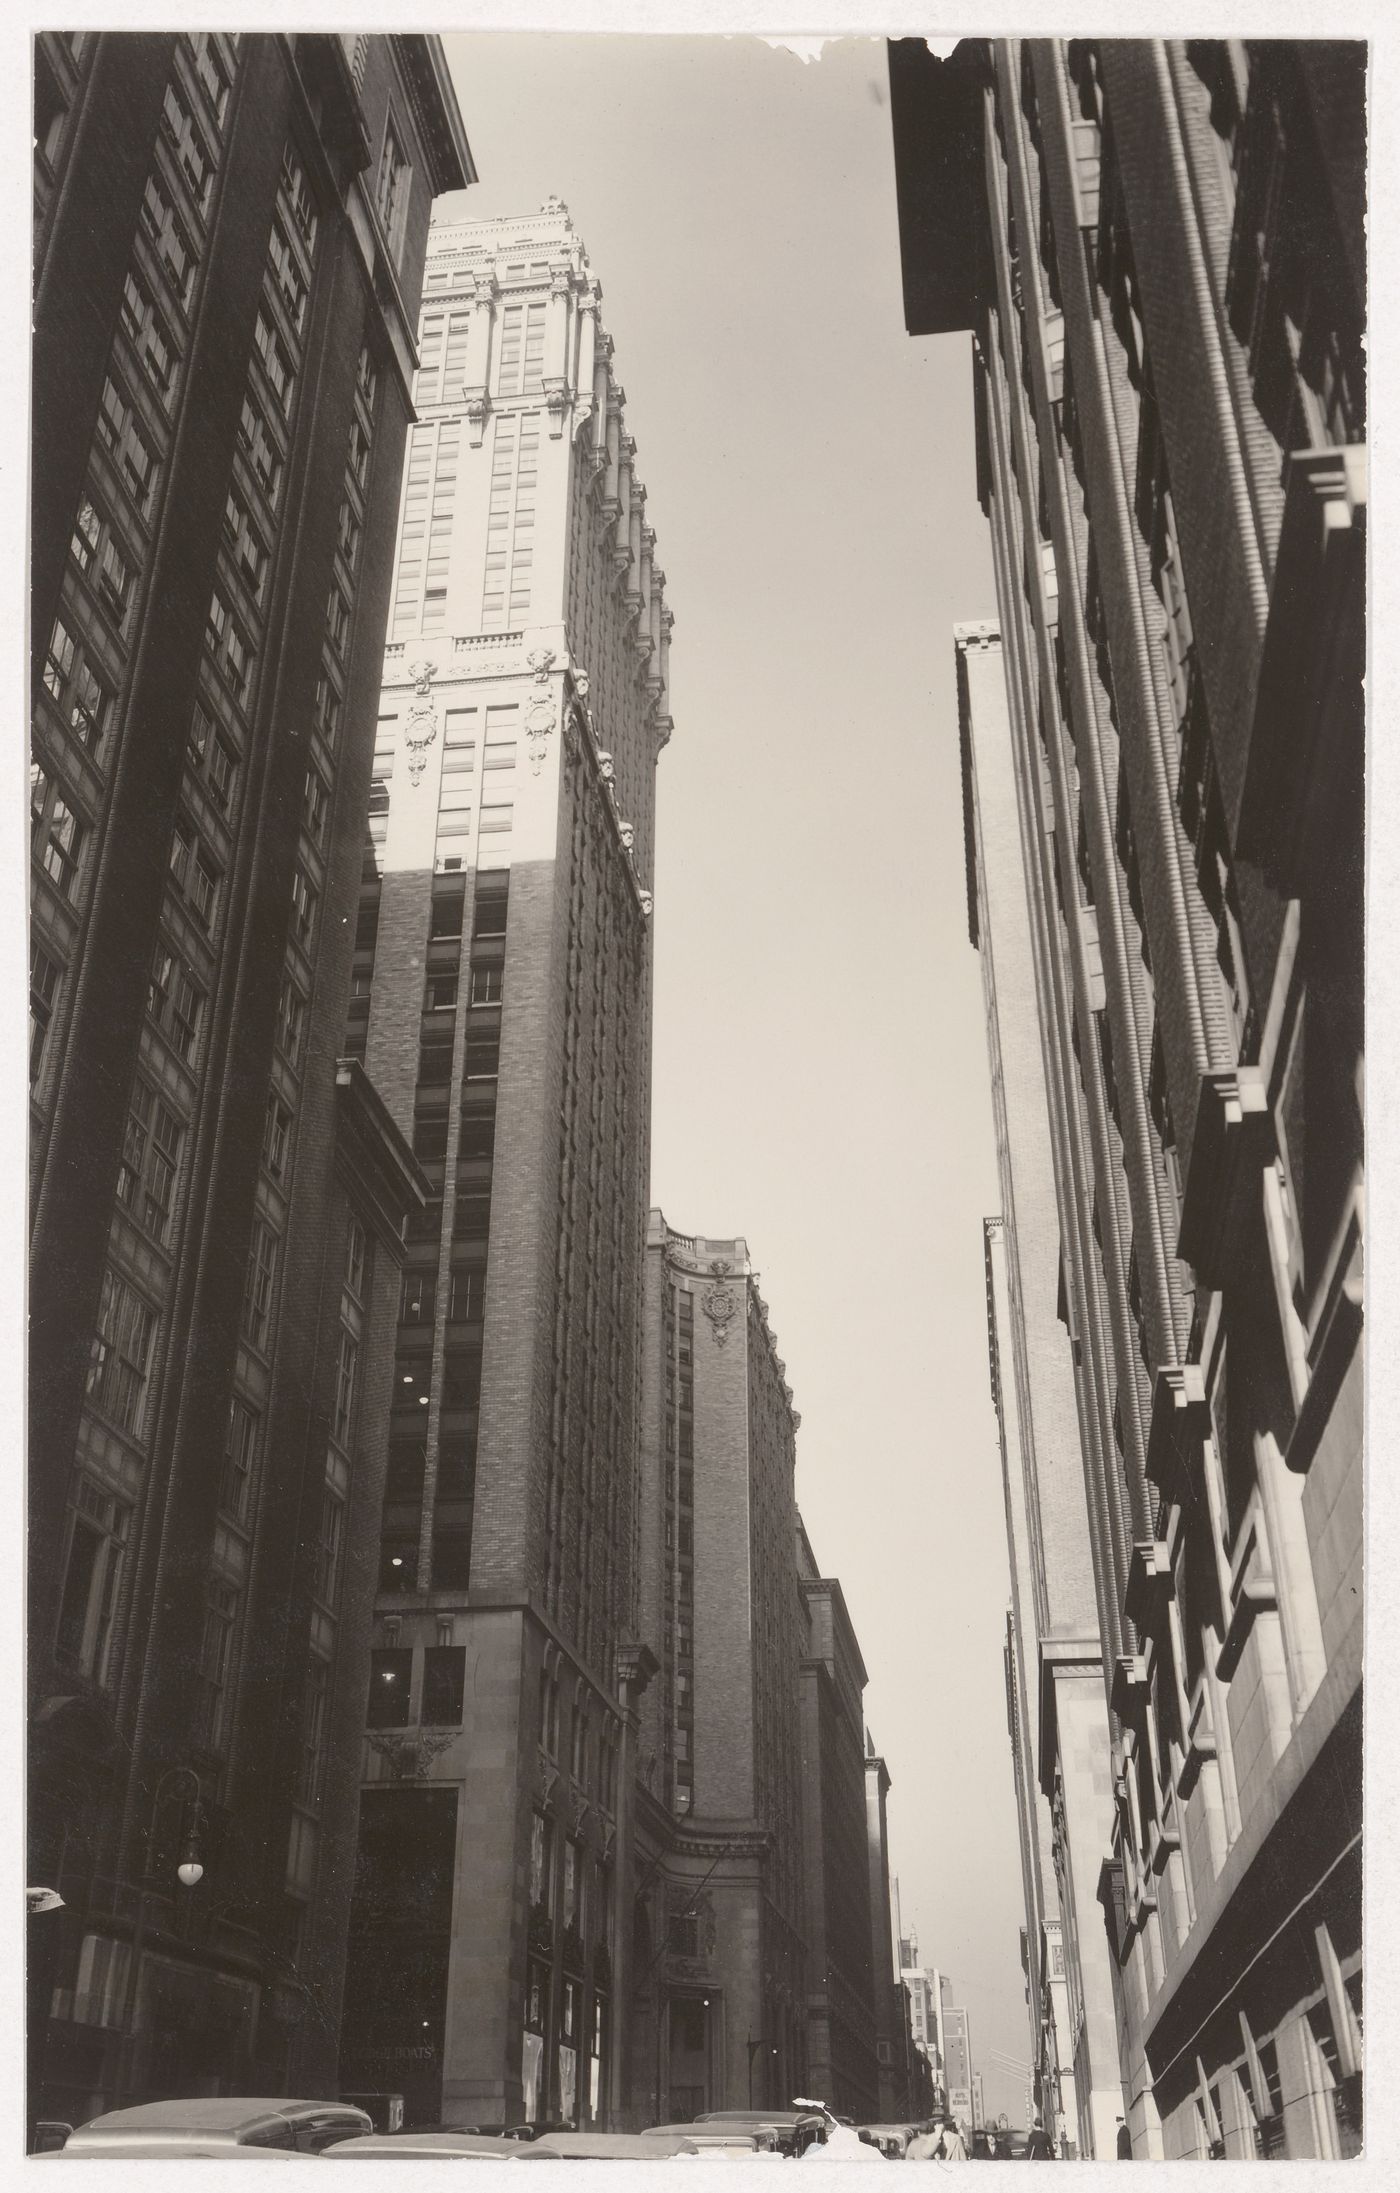 Canyon, 46th Street and Lexington Avenue, looking West.